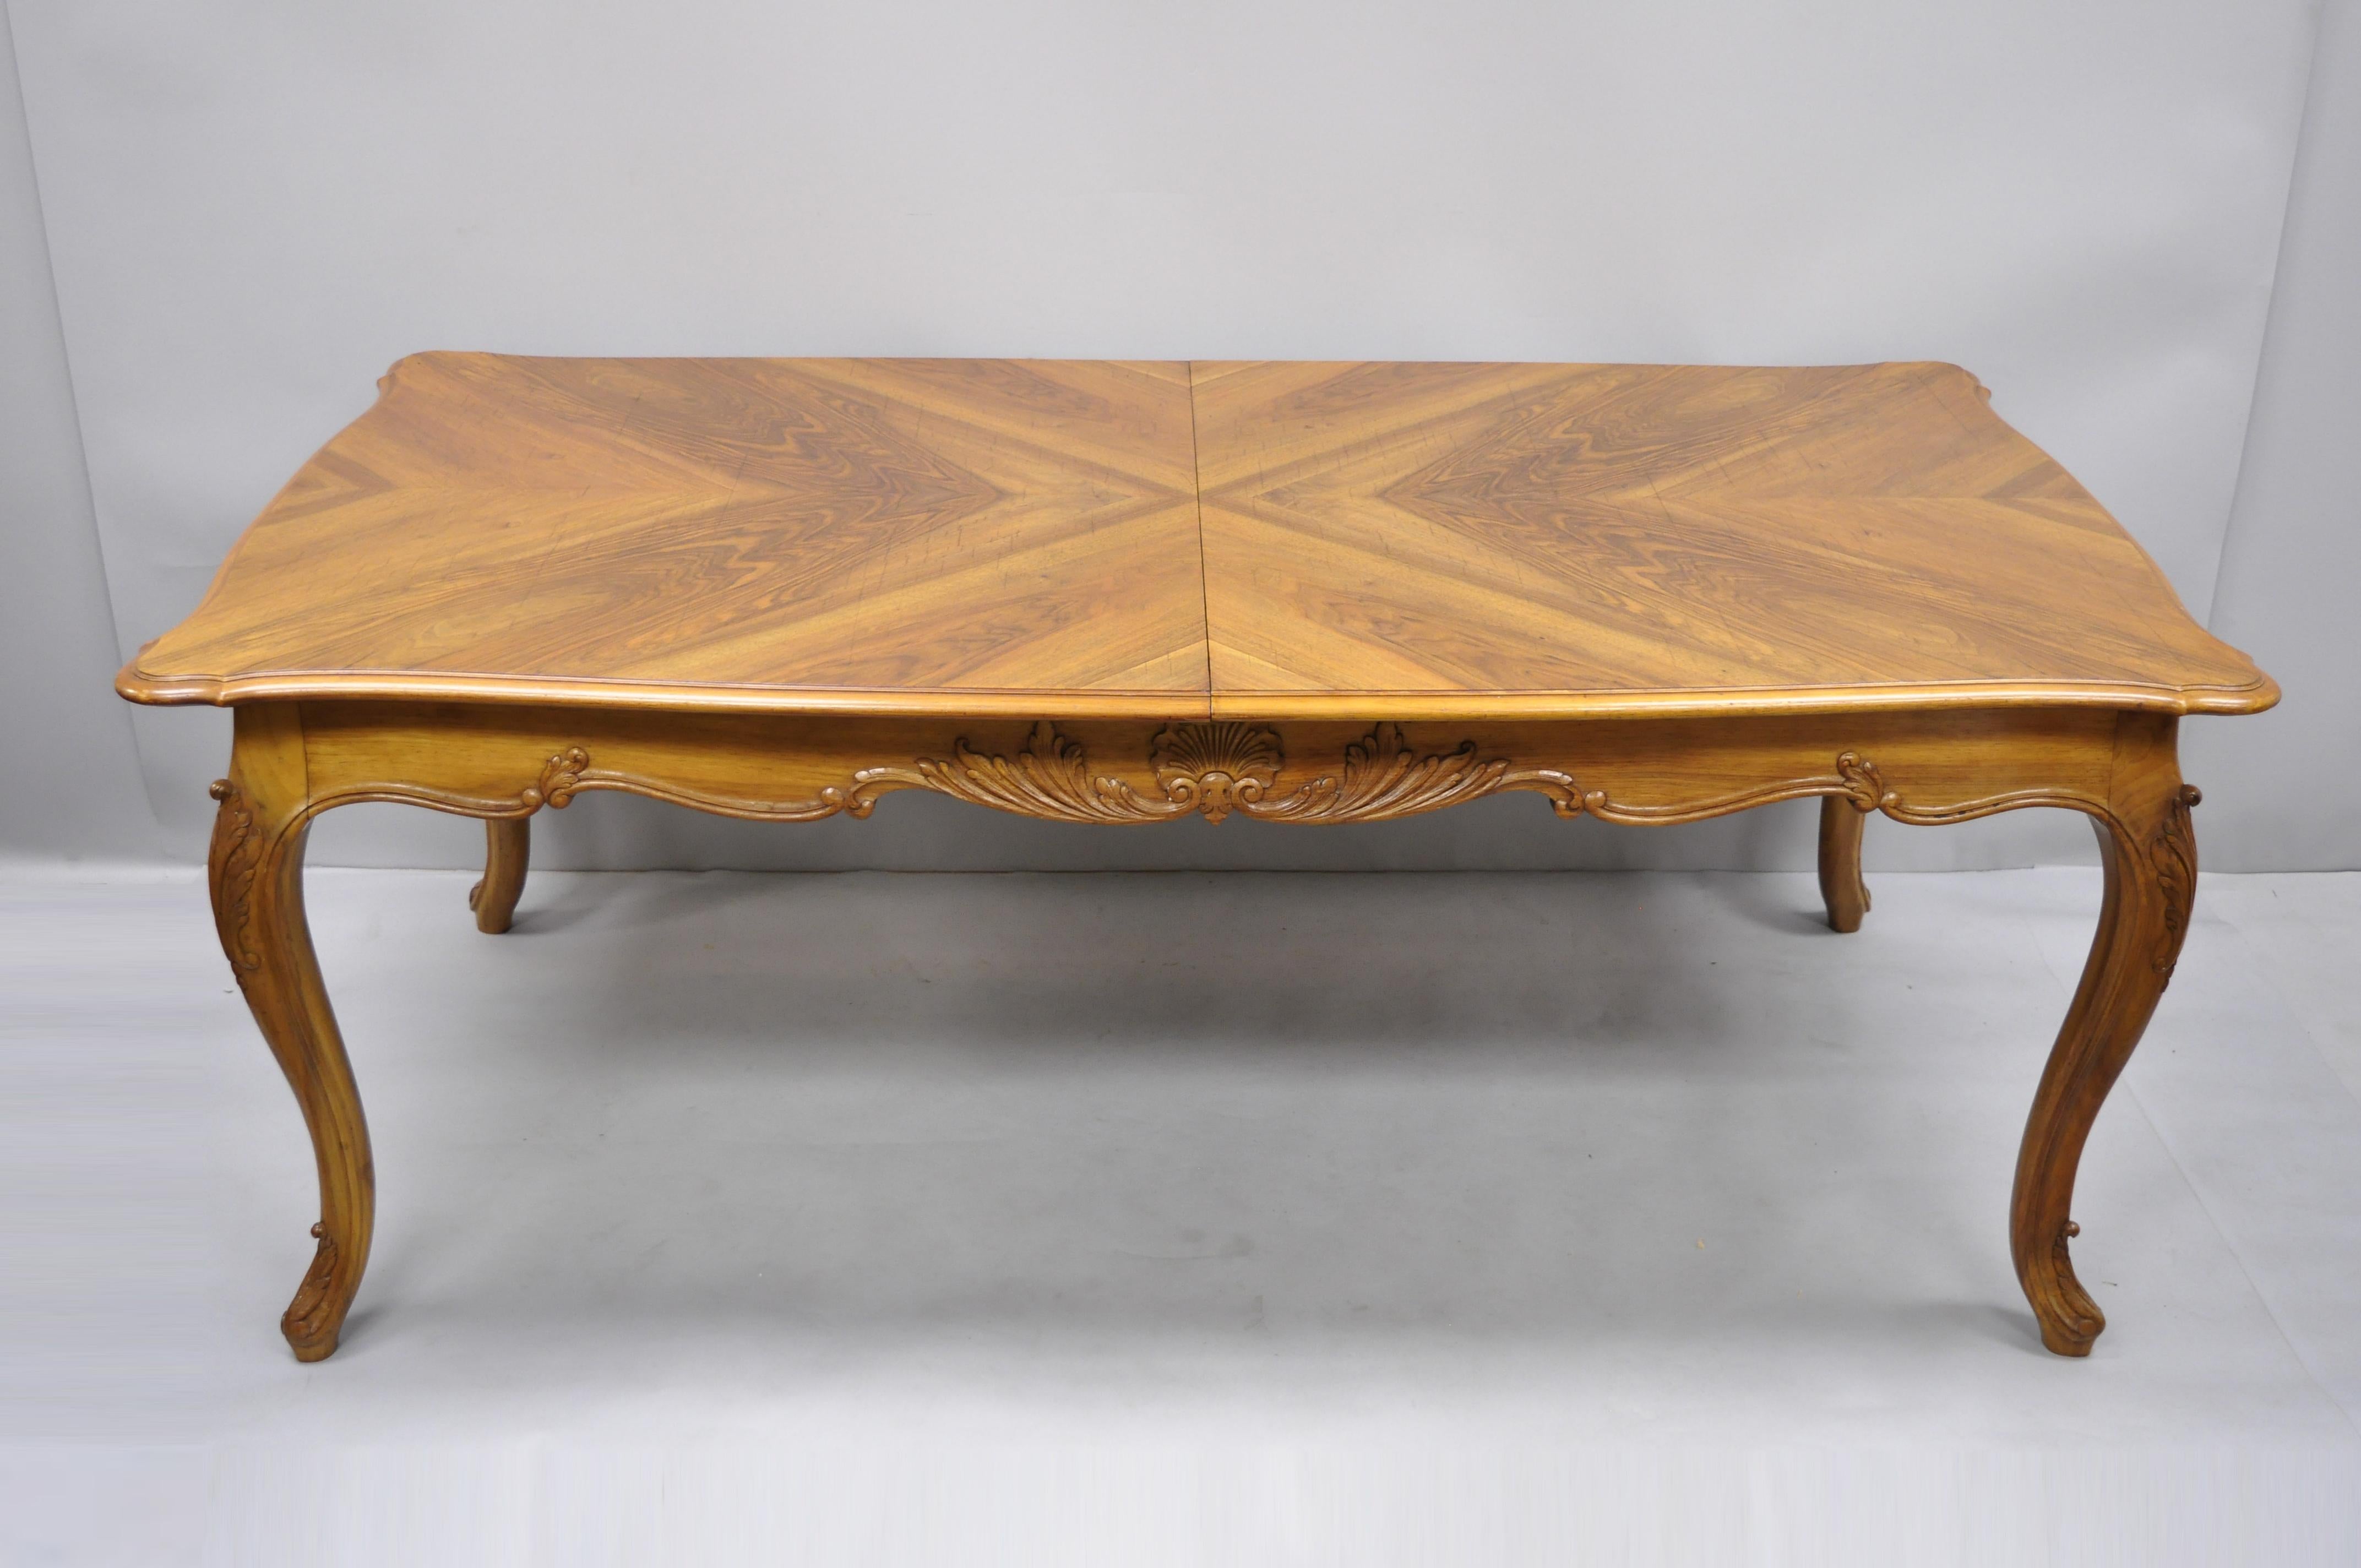 French country Louis XV style shell carved walnut dining table with two leaves. Item features (2) 24